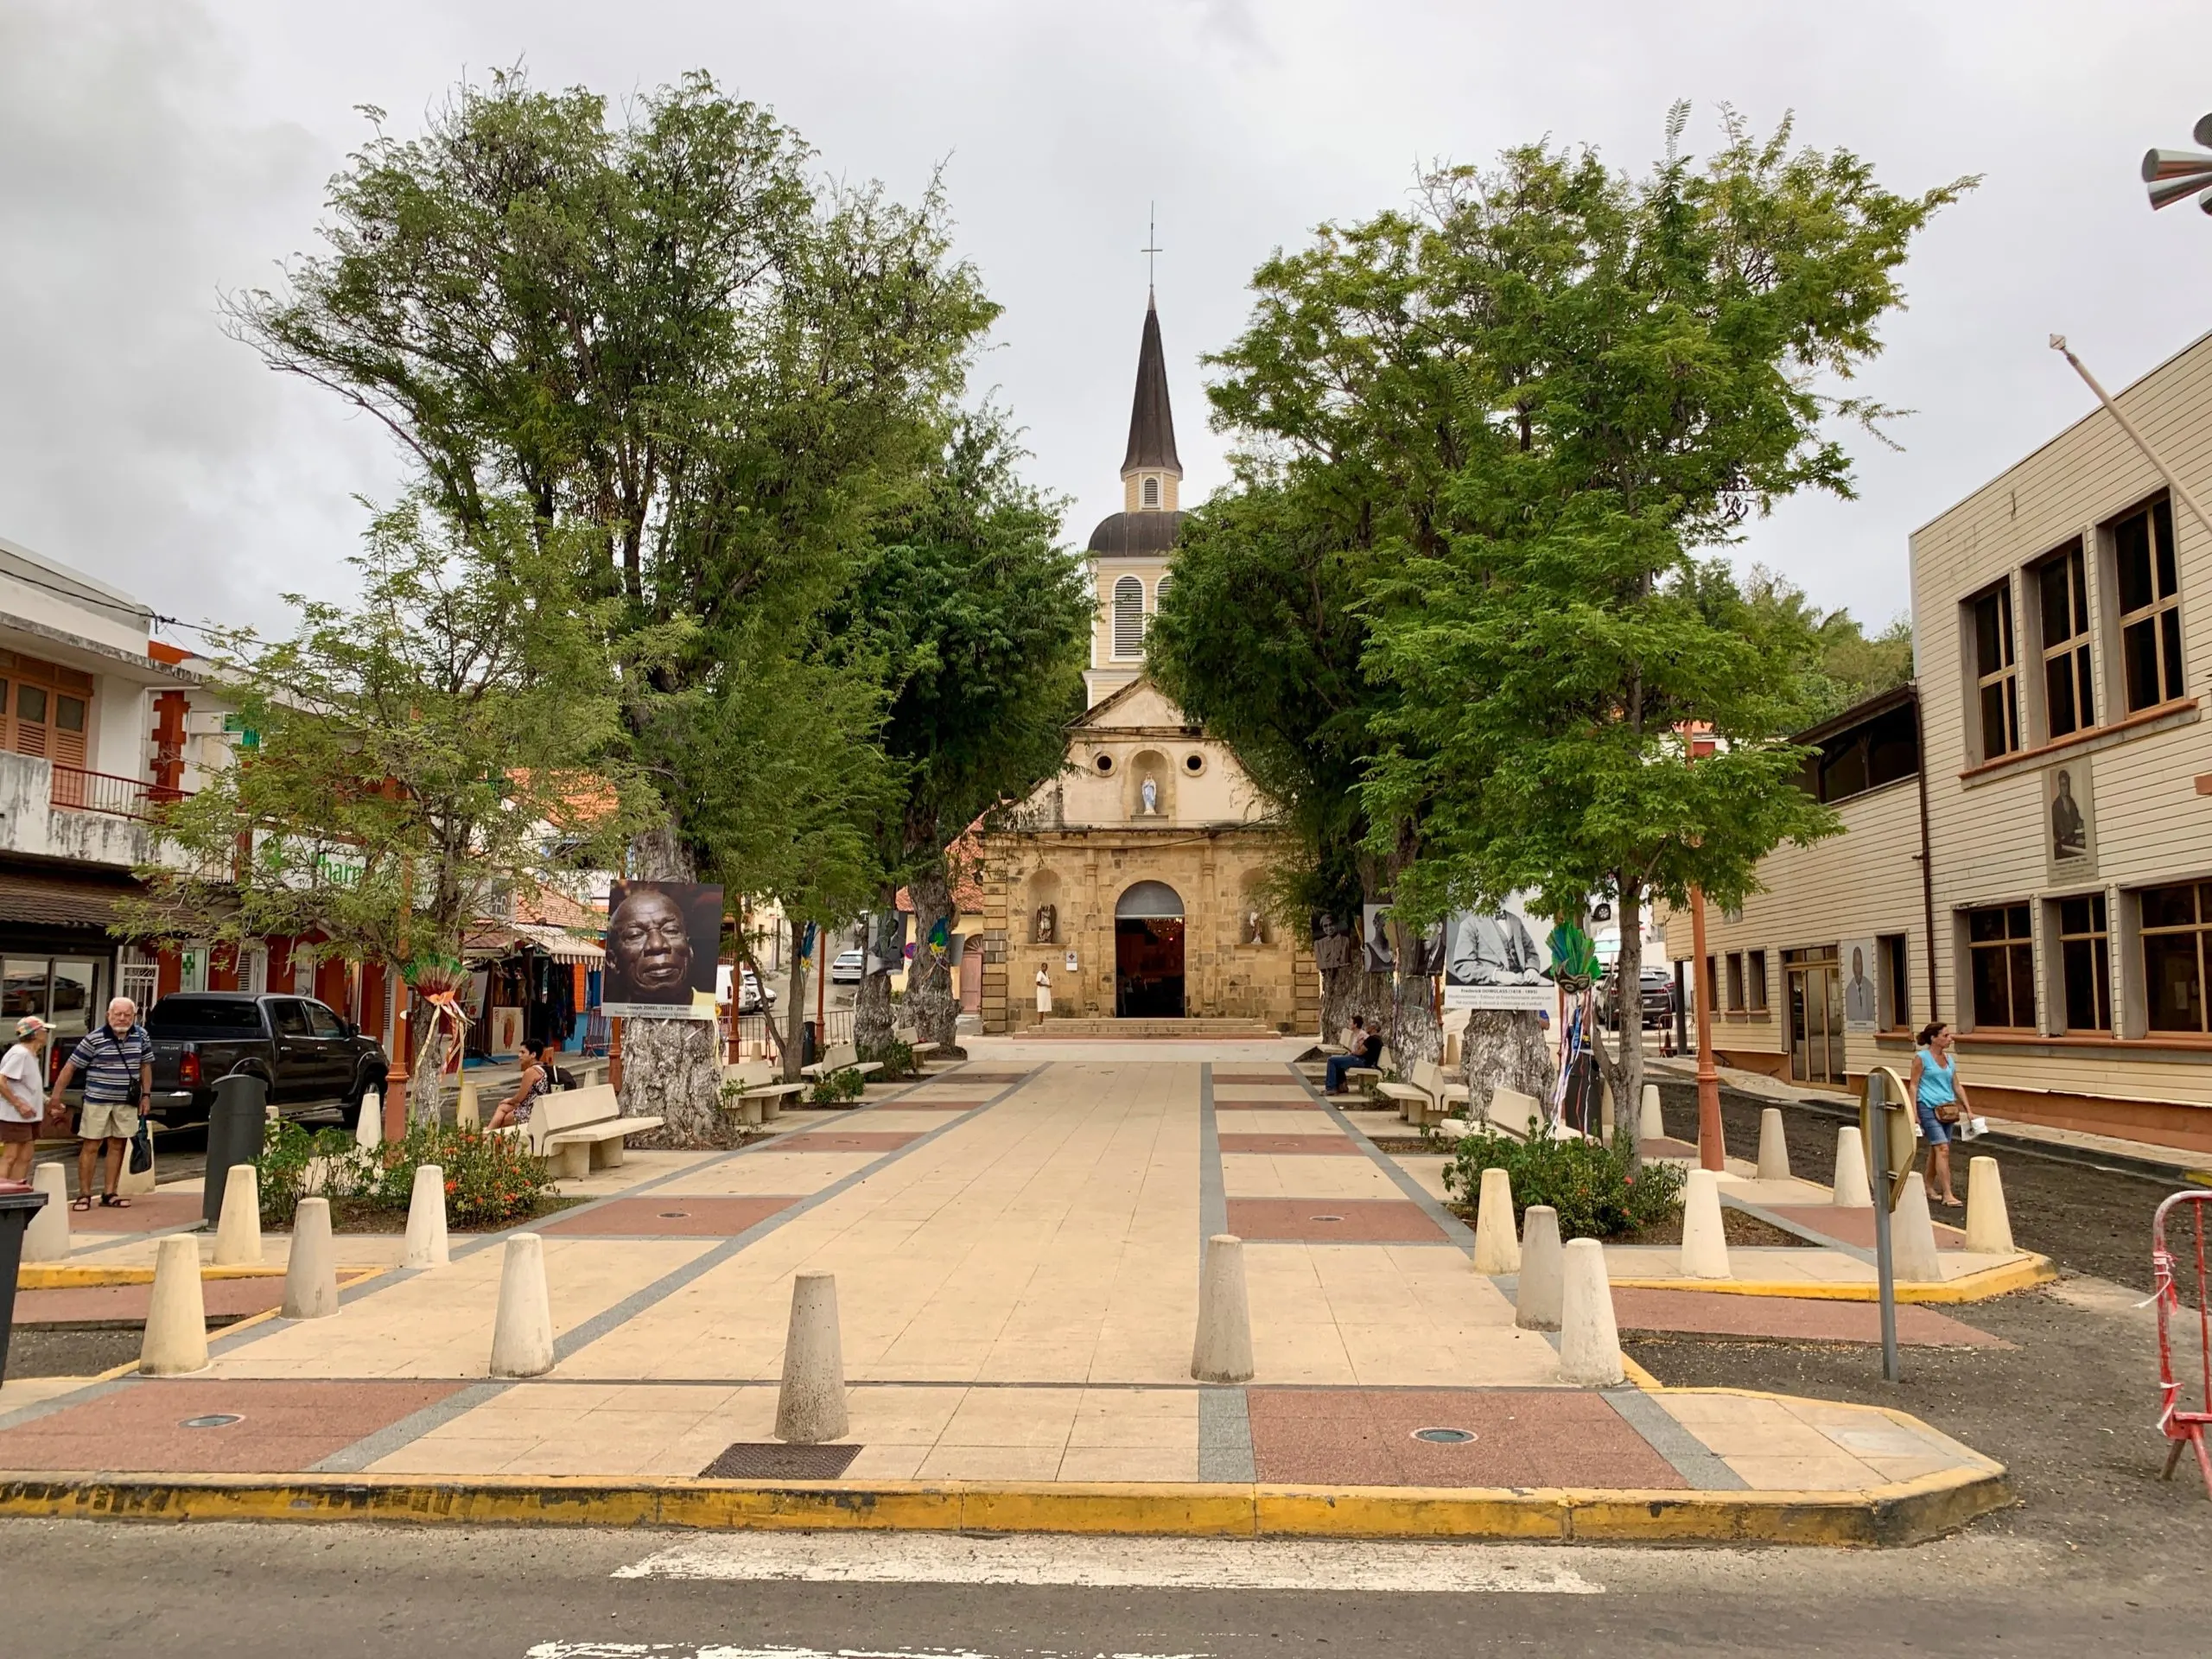 The main square and cathedral in downtown Sainte-Anne